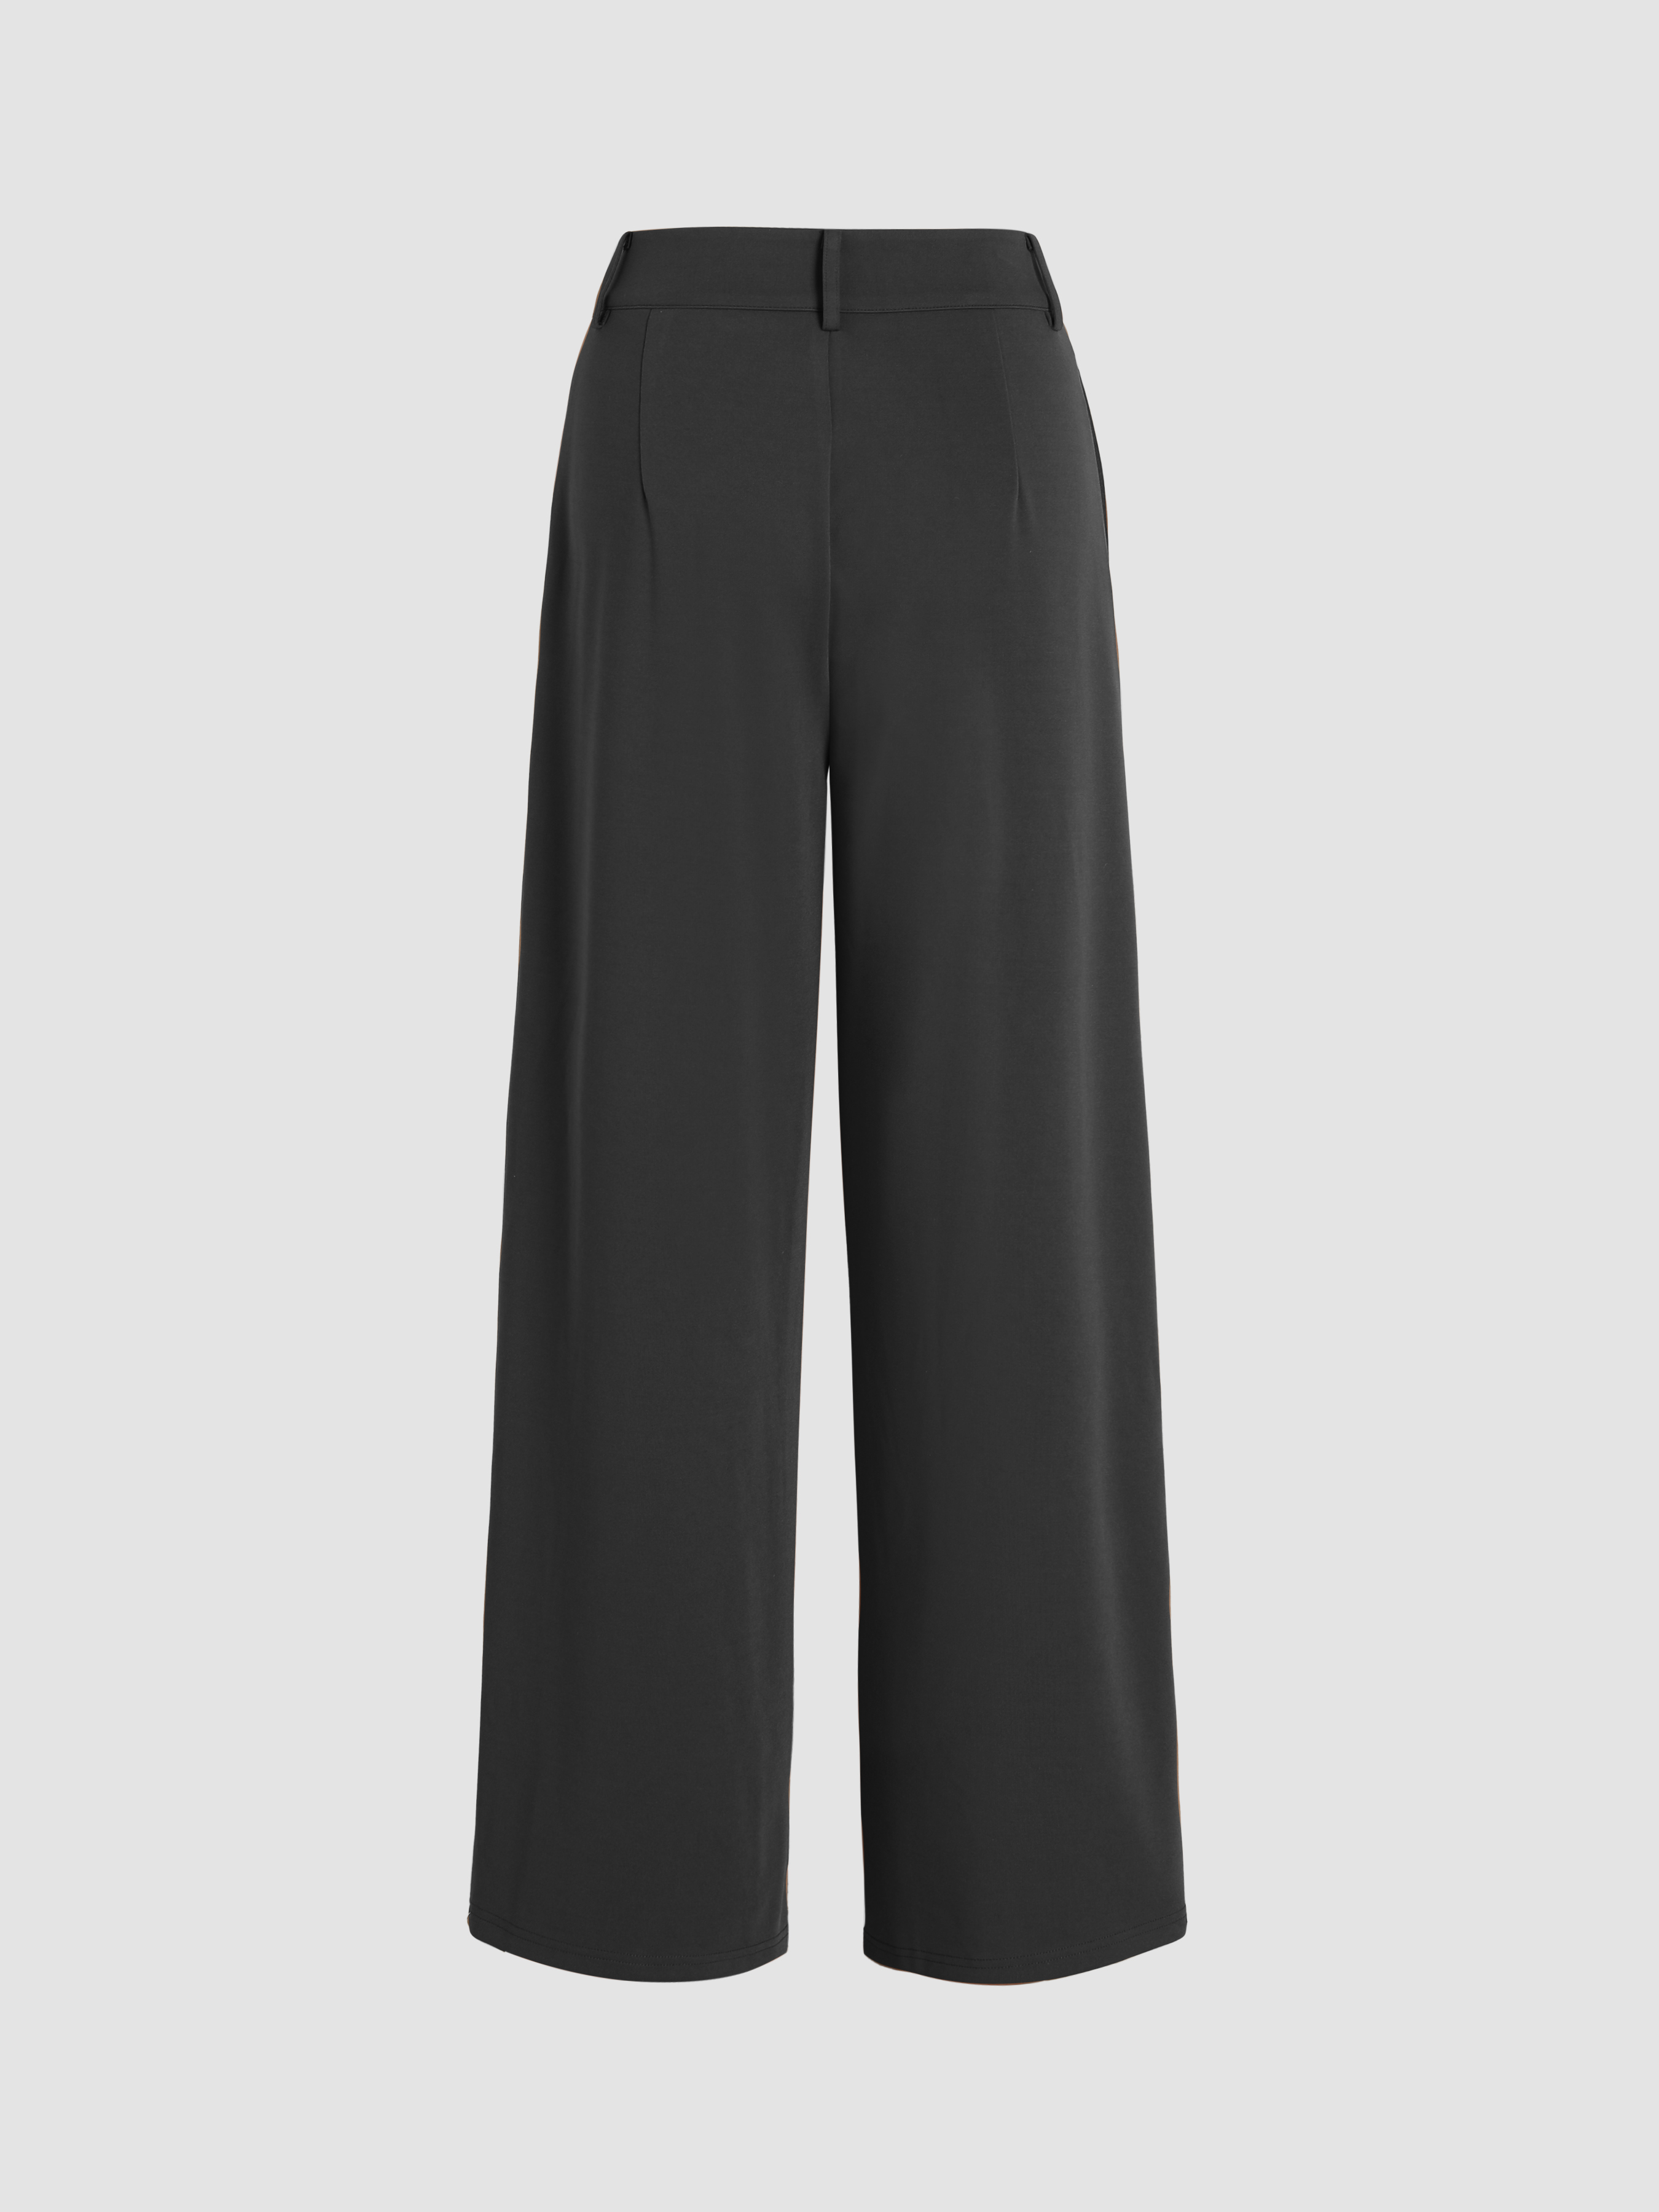 QUICK FACTS ABOUT THE VIRAL PLUS SIZE WIDE LEG PANTS FROM CIDER 🍎 They are  from a fast fashion brand. The quality is not amazing. But